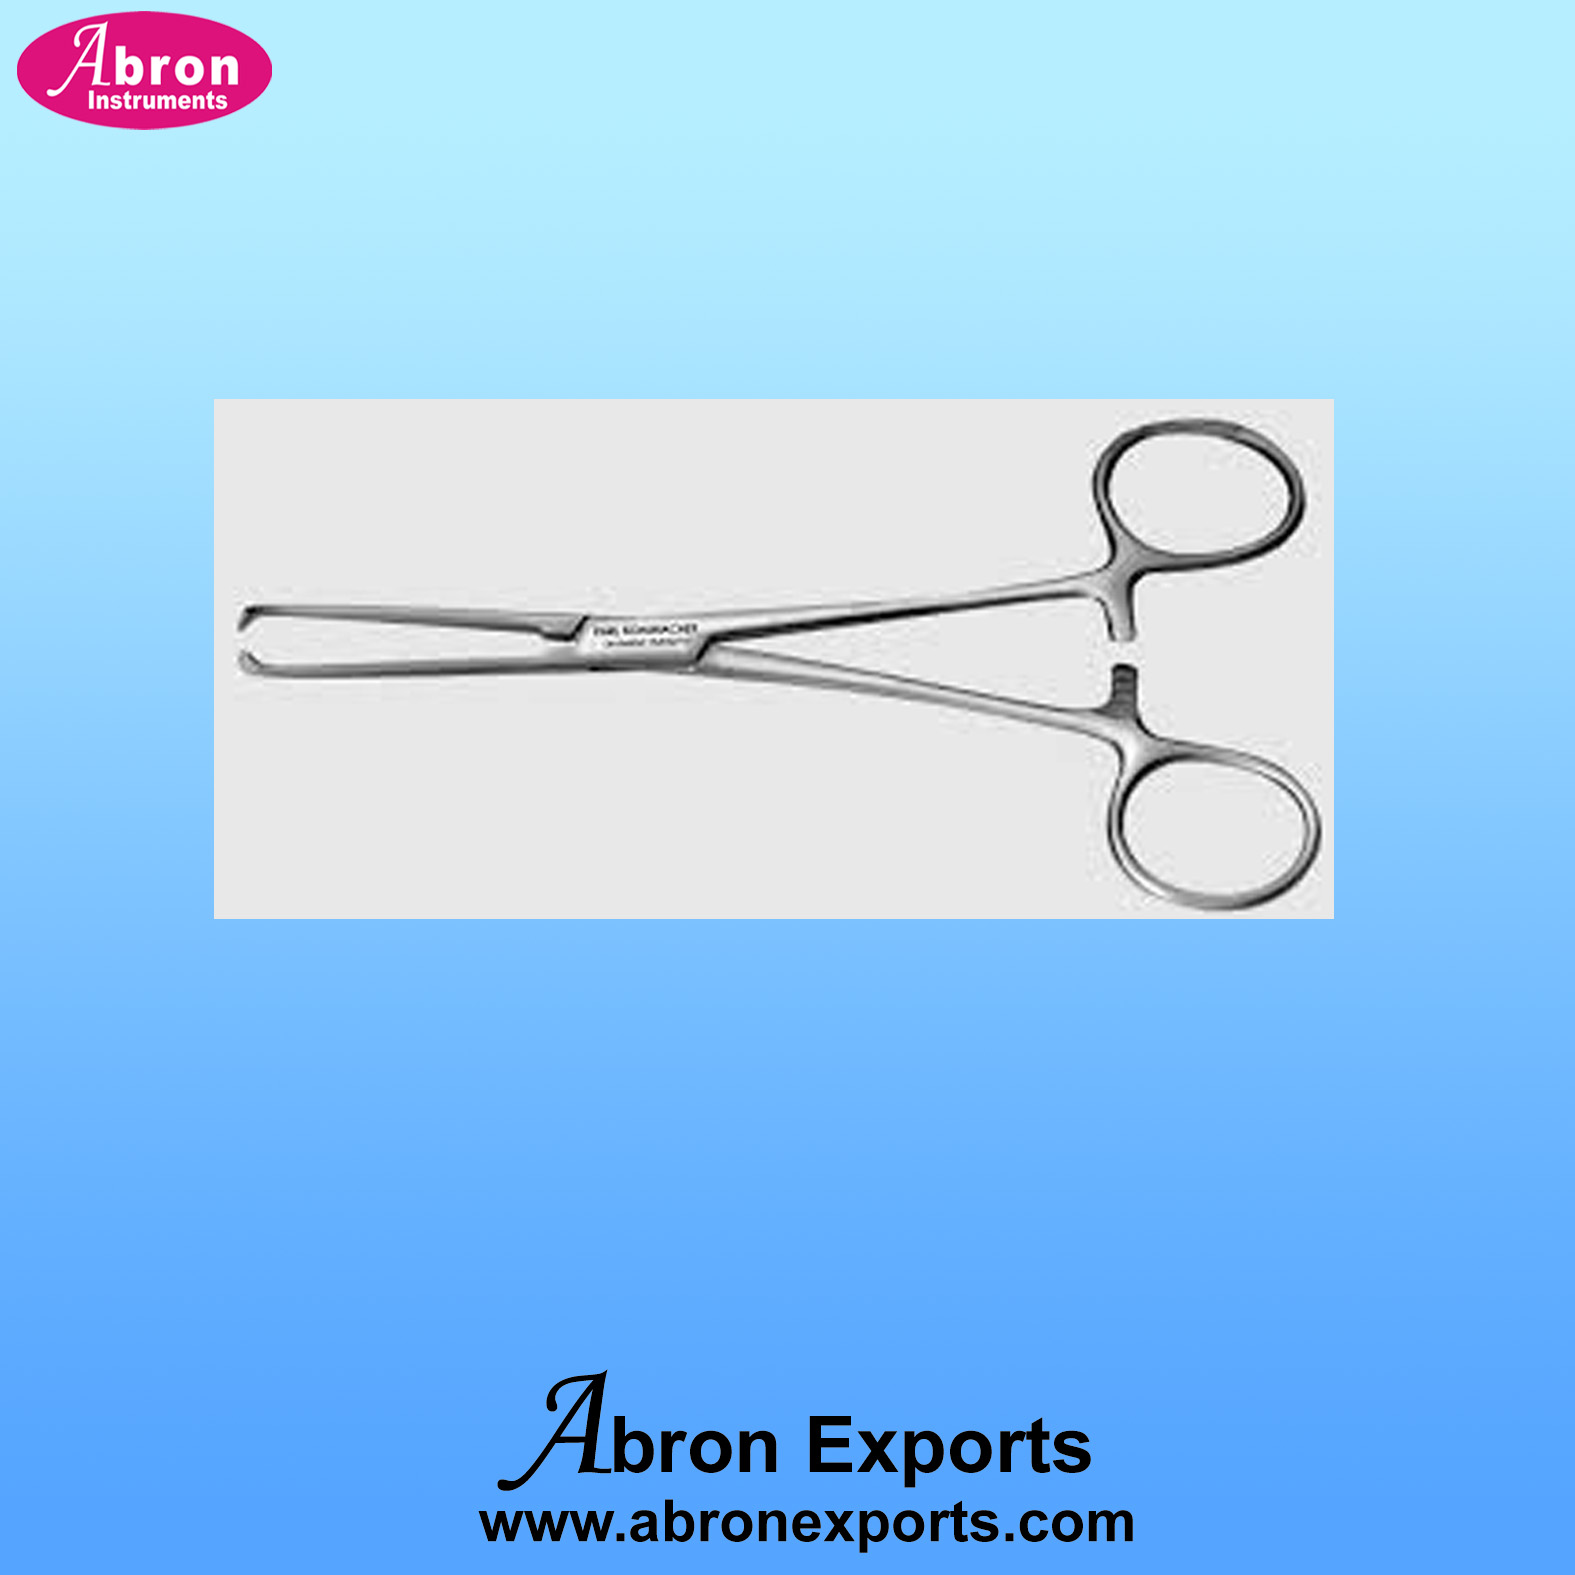 Surgical abron forceps stainless steel tissue biopsy ABM-2620-24 